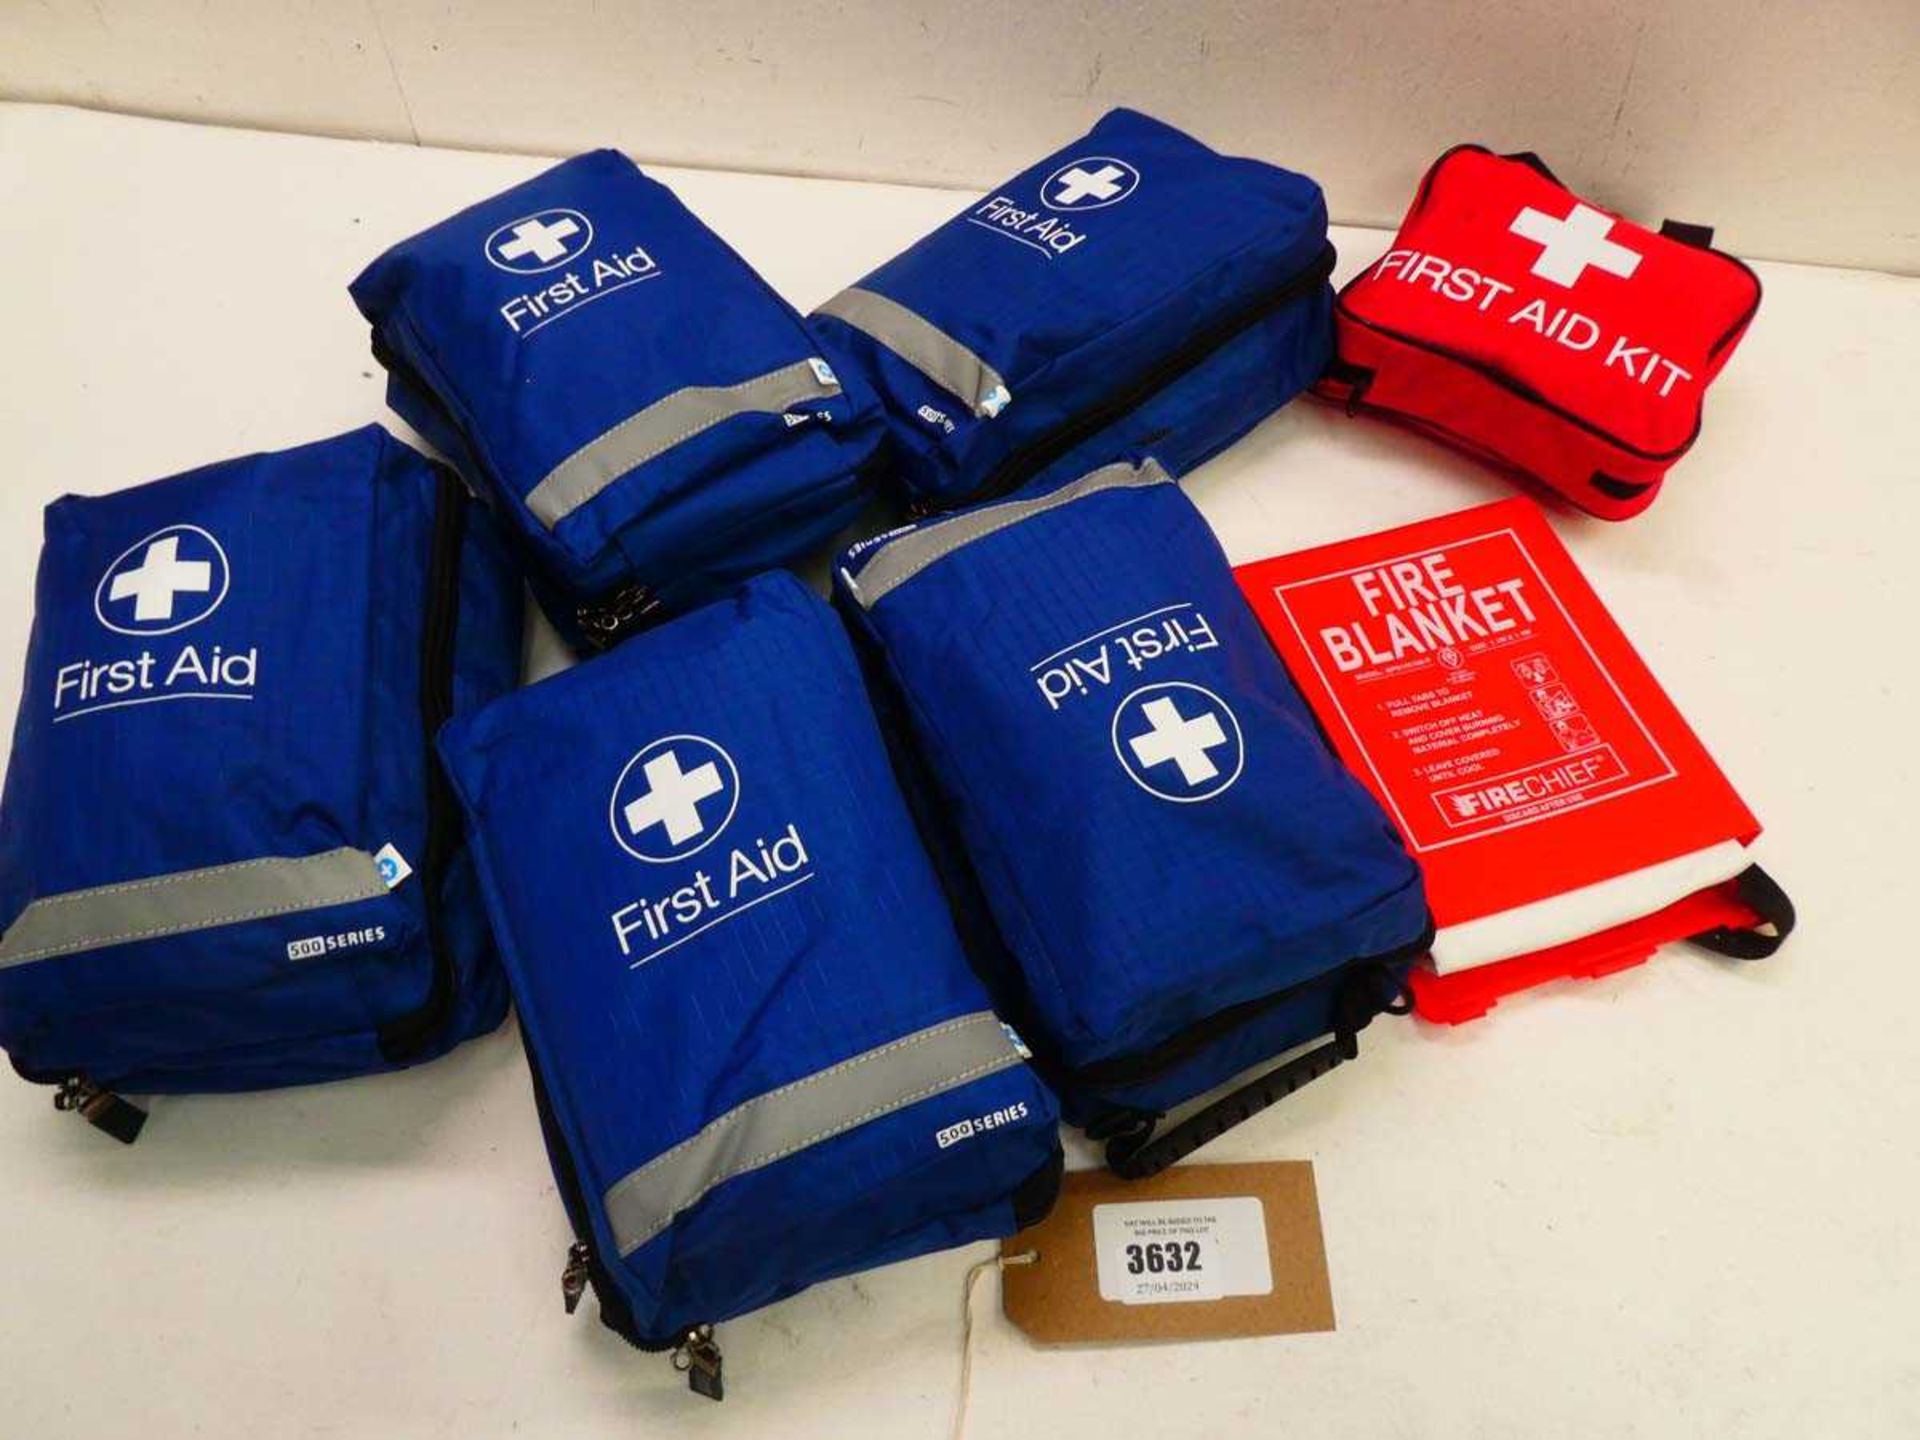 +VAT Various first aid kits plus a fire blanket